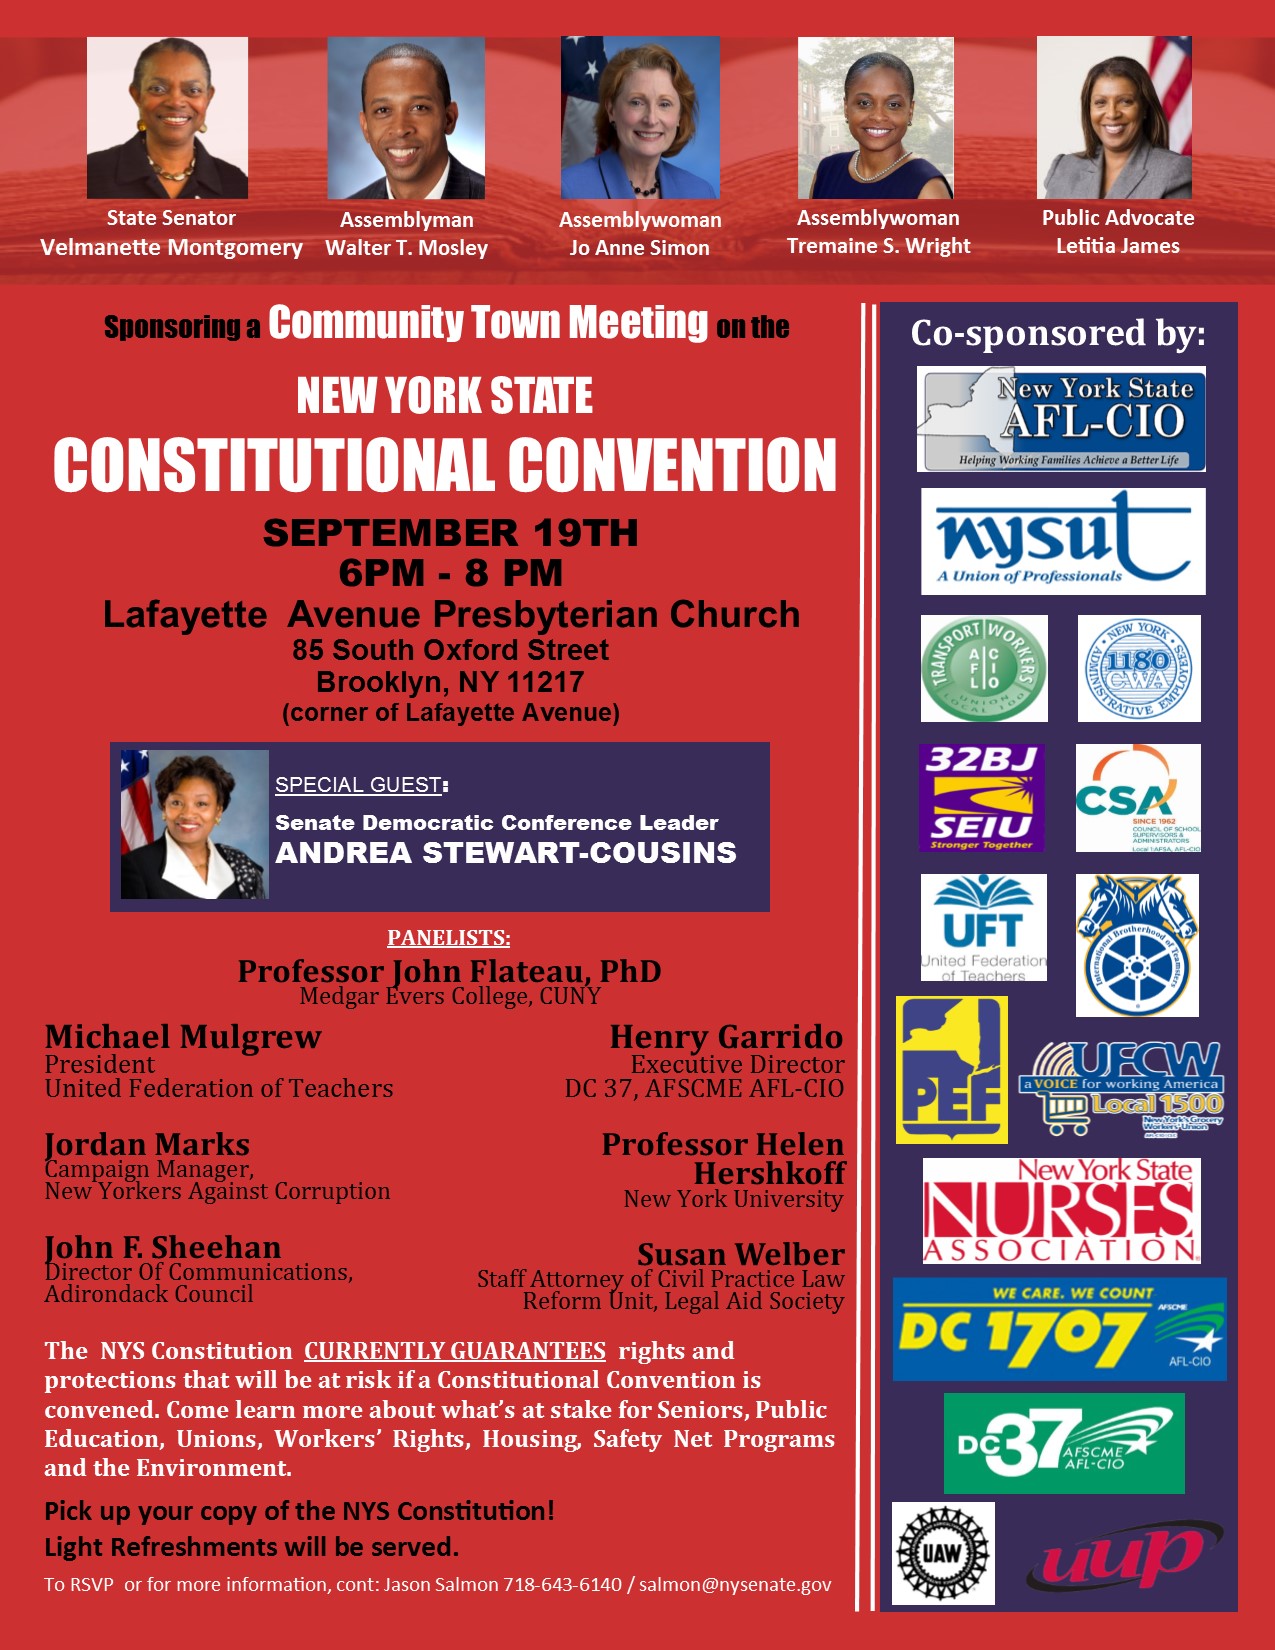 9-13-17_updated_constitutional_convention_flyer_with_leader_and_pef_logo.jpg